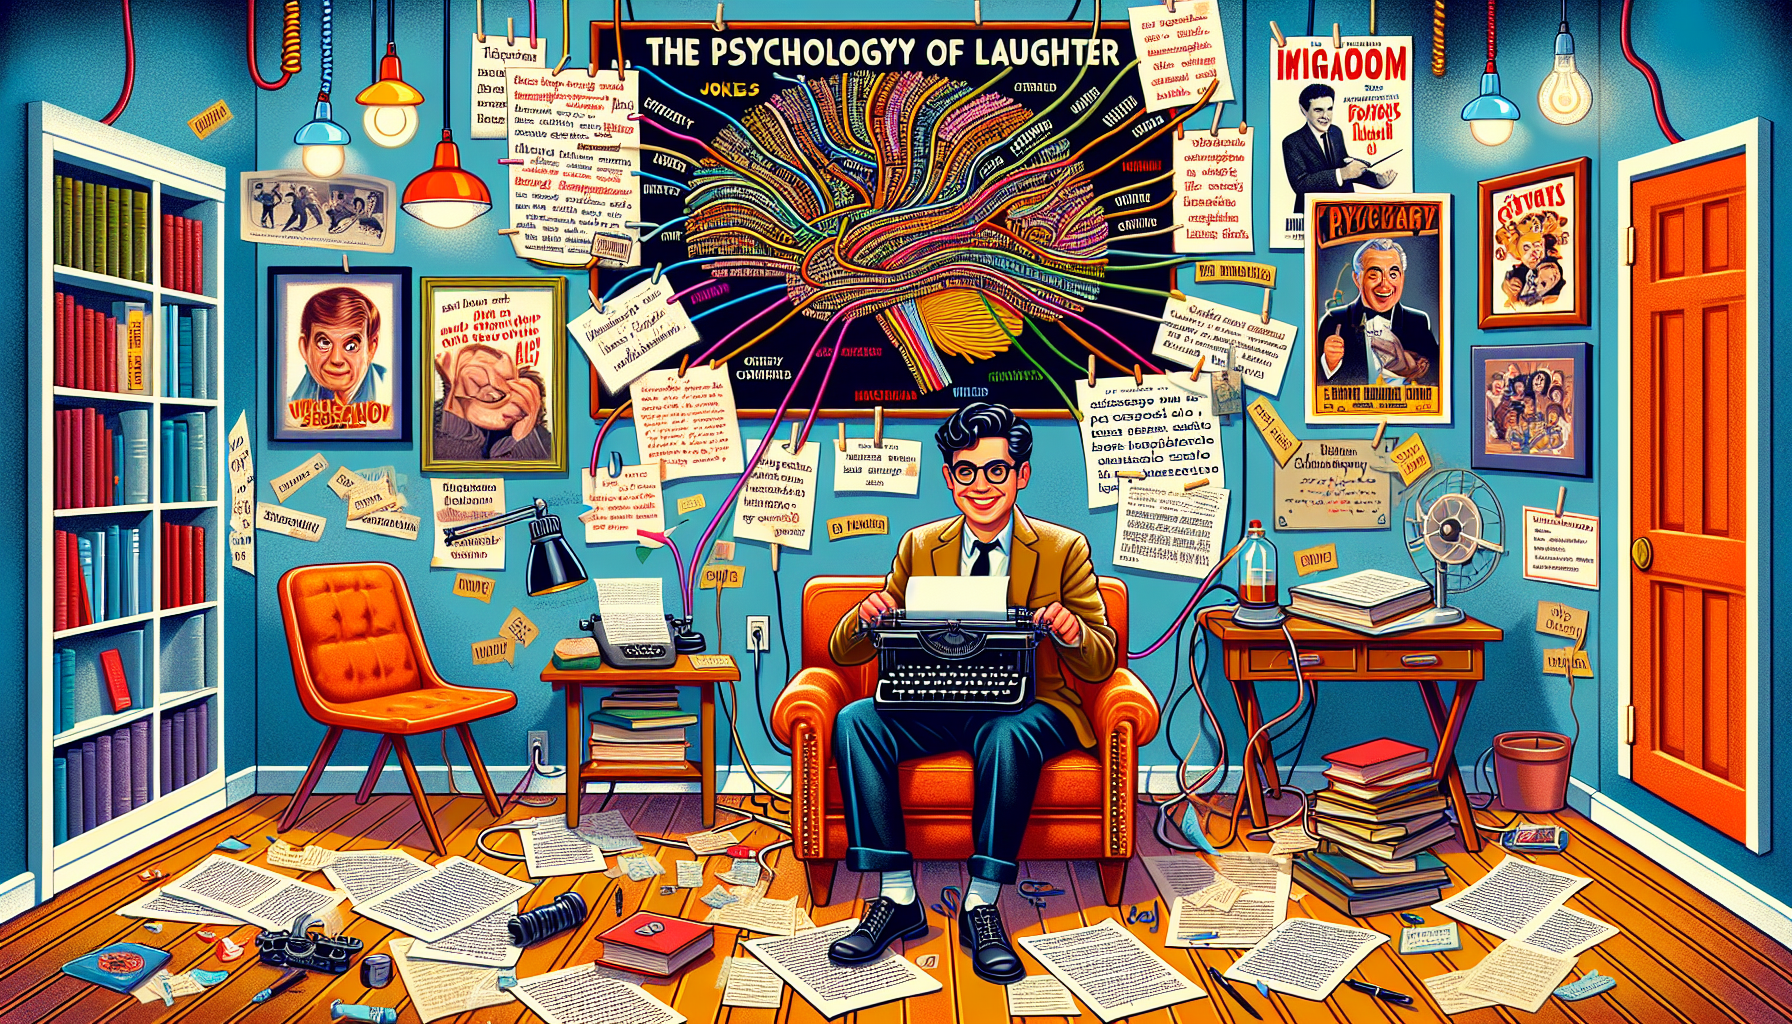 A cozy and imaginative writing room with a whimsical, vintage typewriter, papers scattered with notes about jokes and comedic timing. On the wall, a large, colorful mind map detailing the psychology o